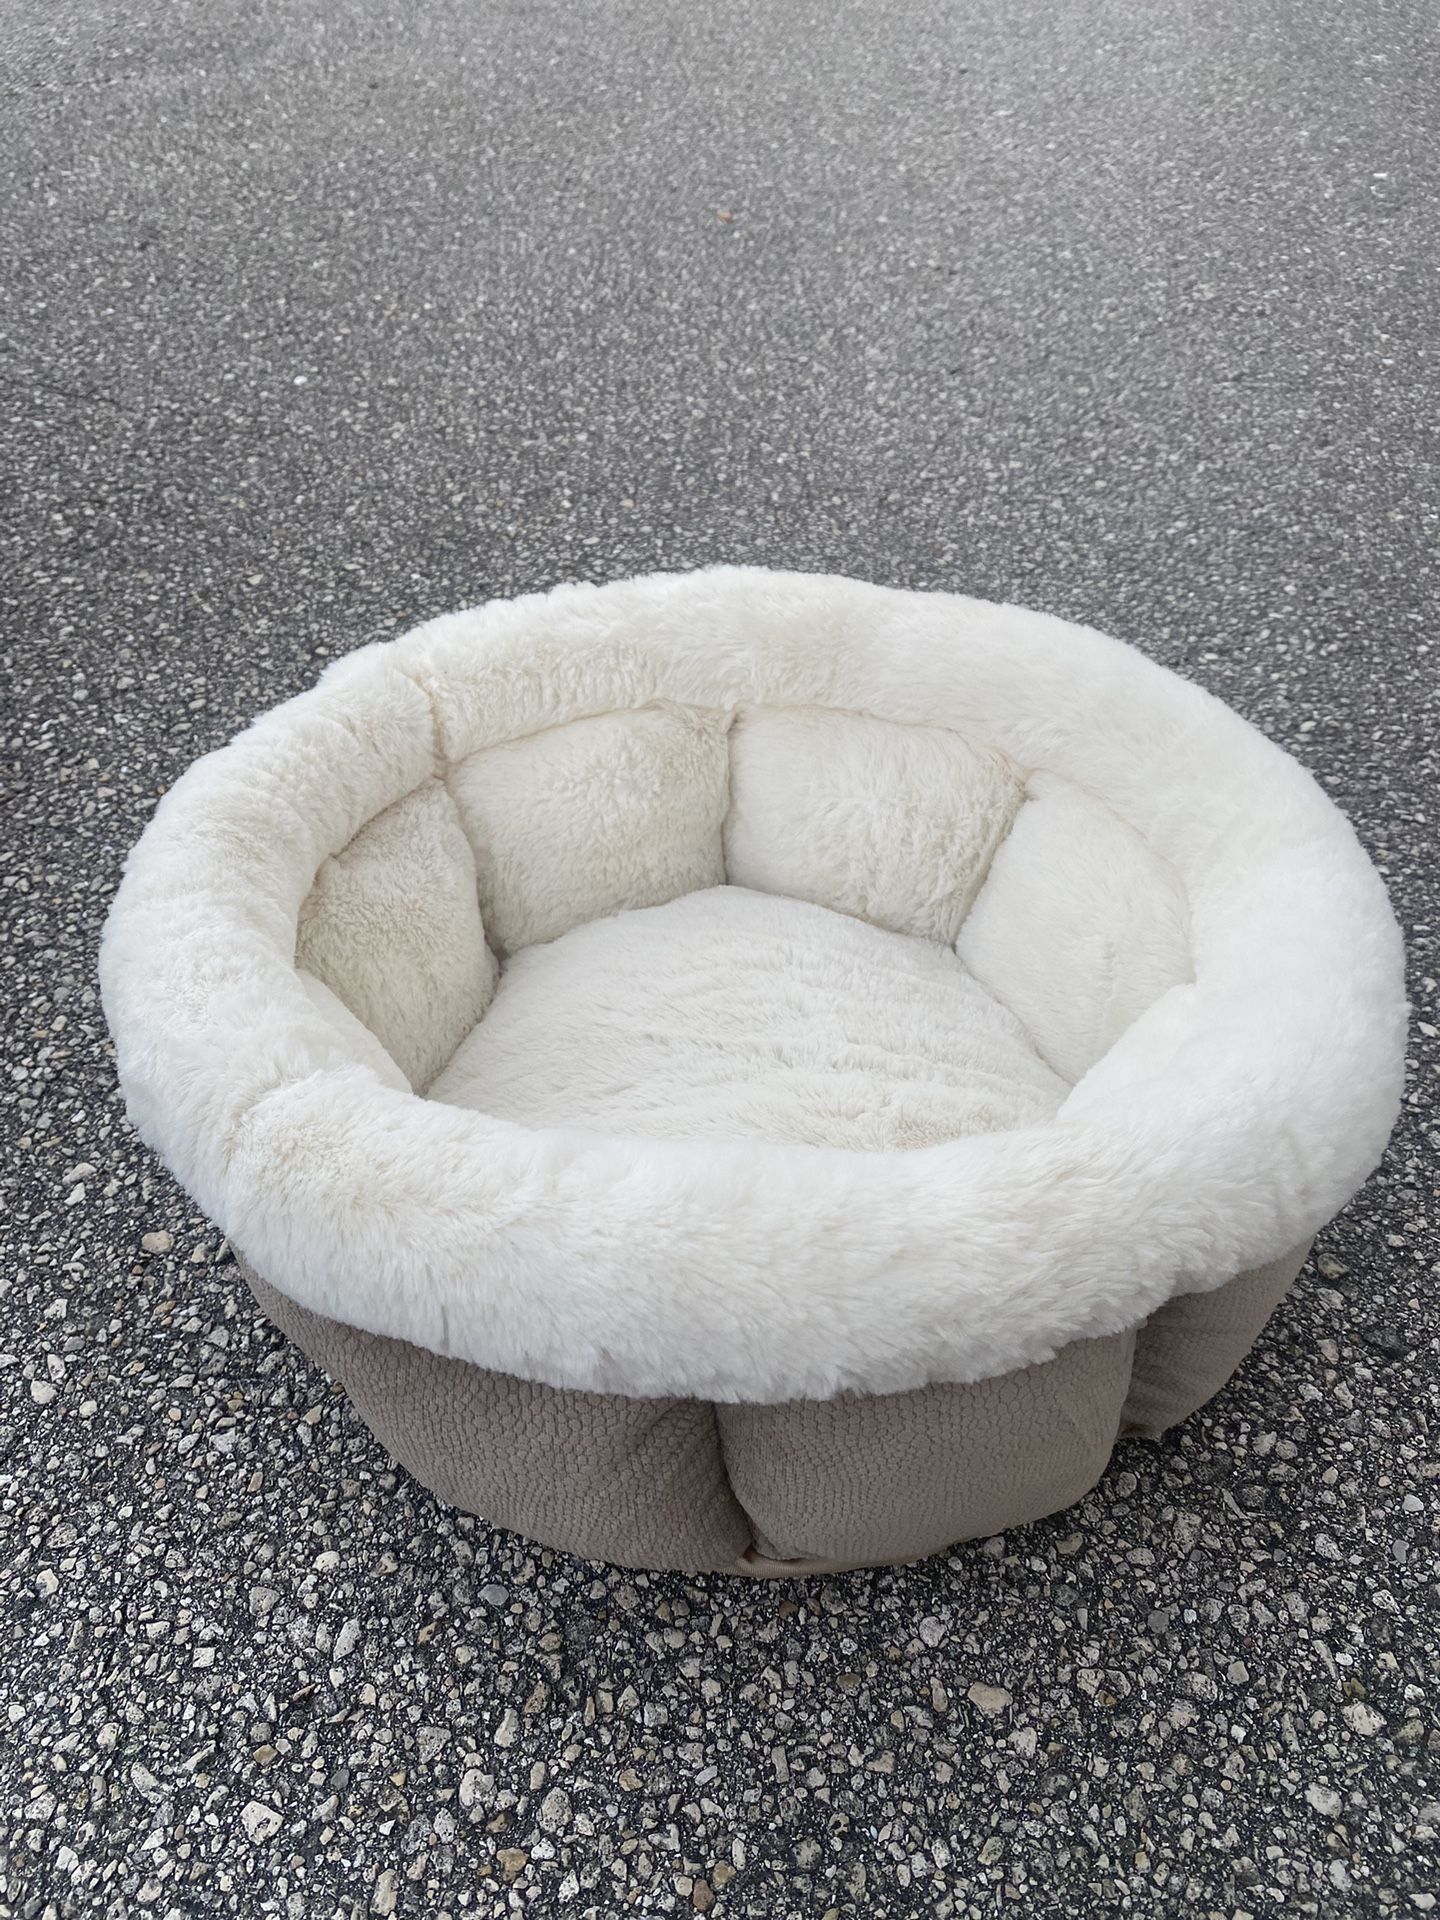 Pet Bed For Cat Or Dog